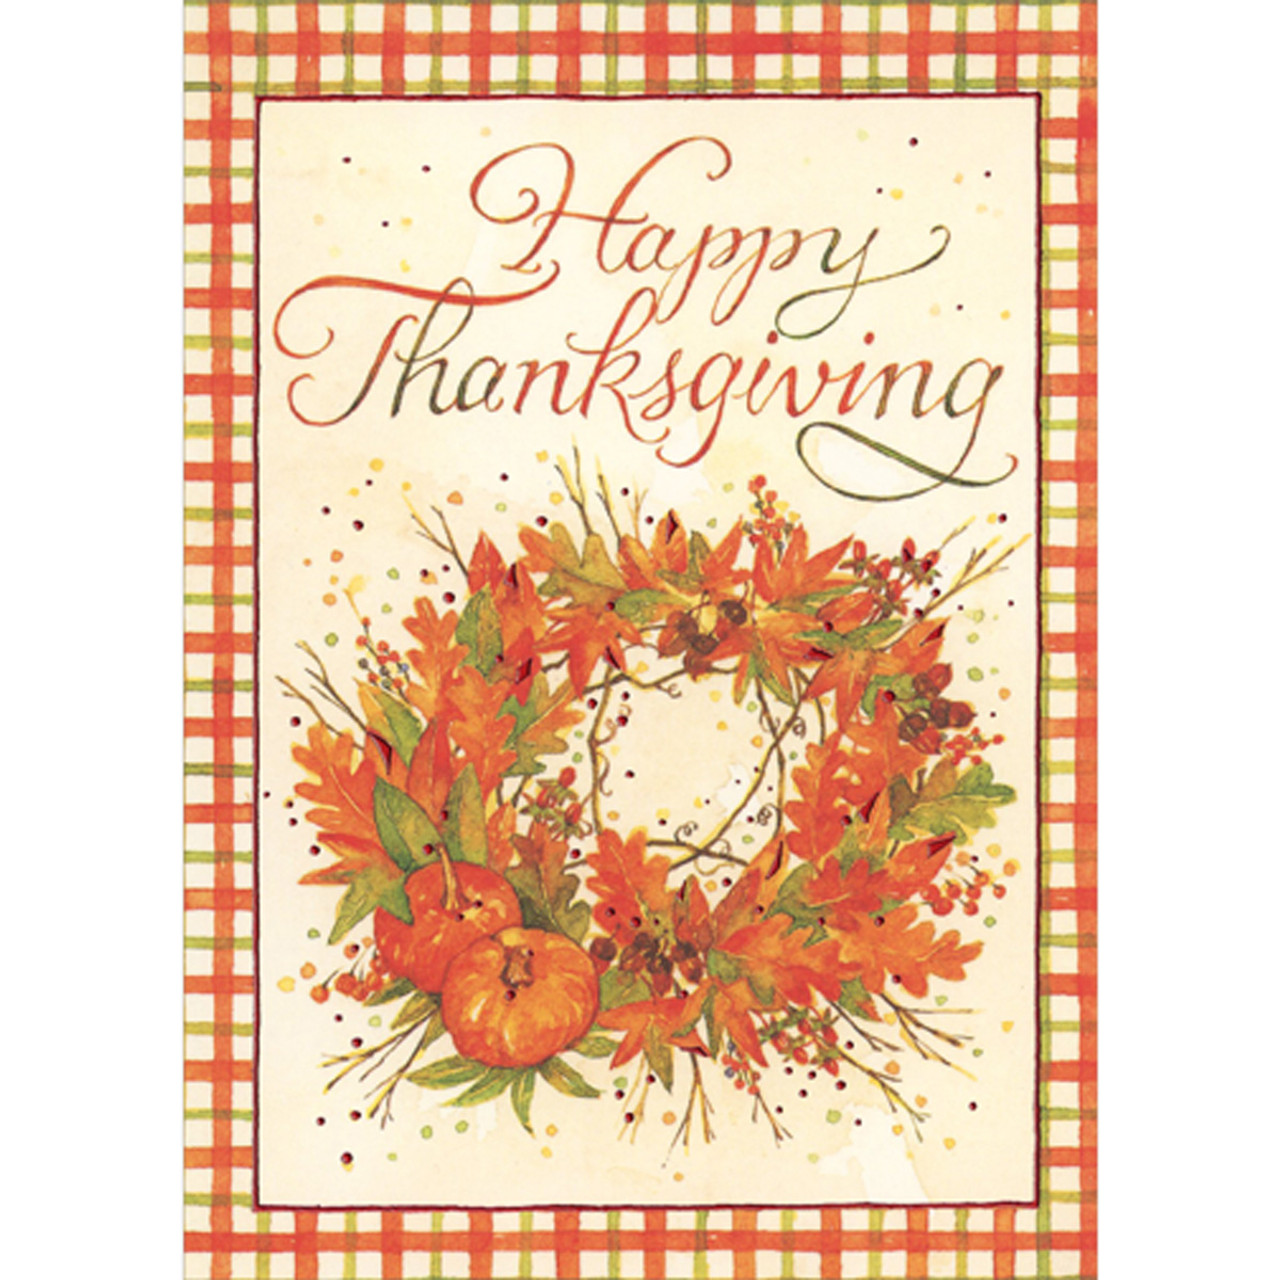 Grateful Cards, Thank You Cards, Thanksgiving Cards, Notecards, Stationery,  Encouragement Cards, Fall Wreath Cards, Christmas gifts